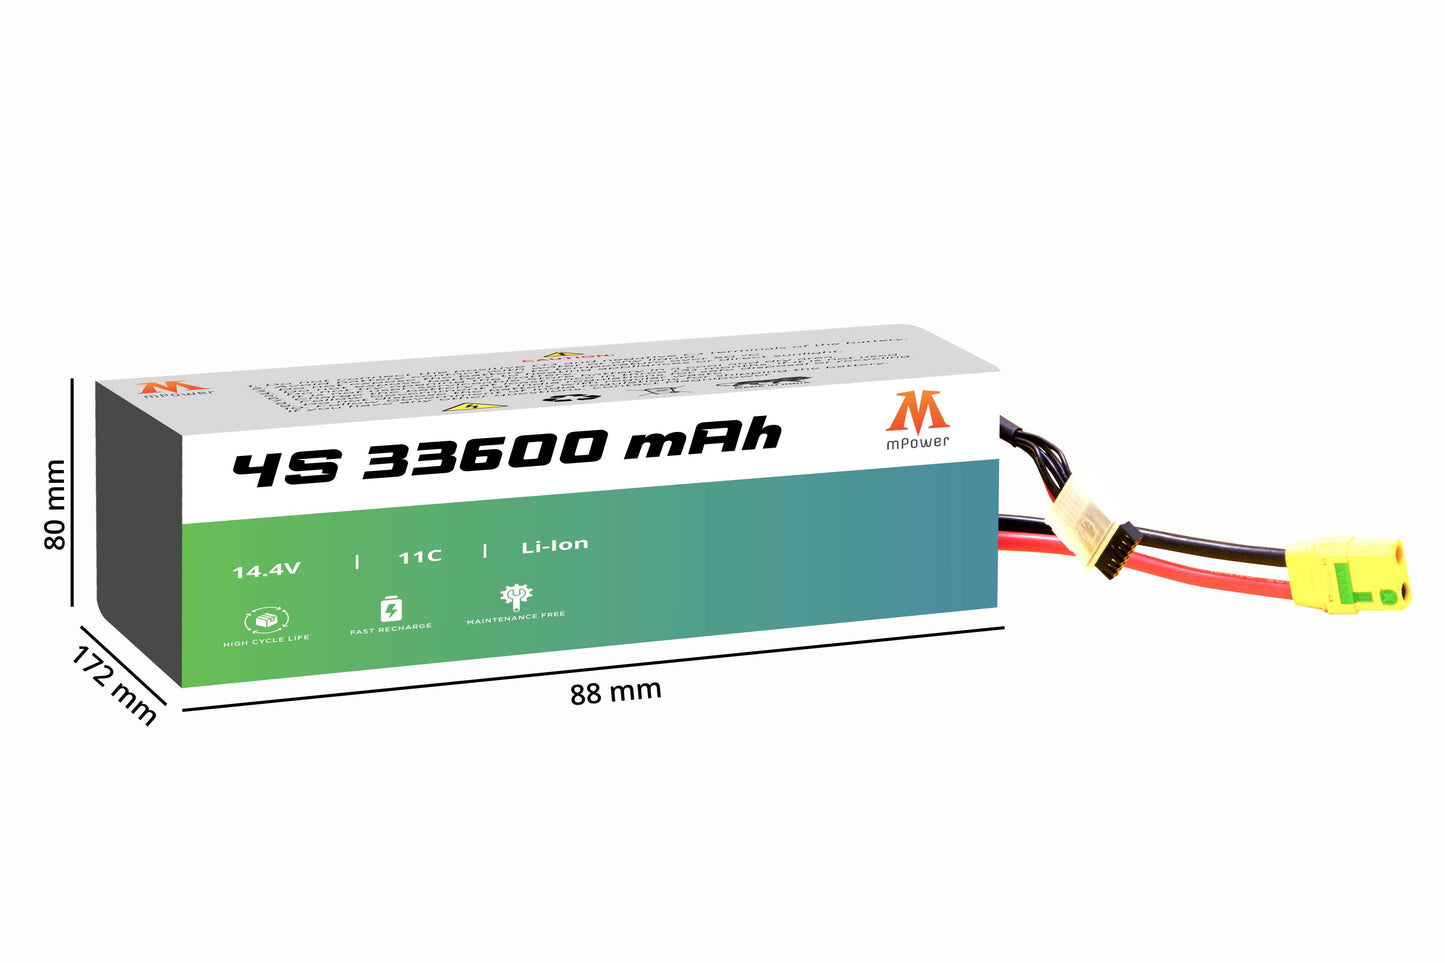 mPower 4S 33600mAh Lithium-Ion Battery for Survey Drones